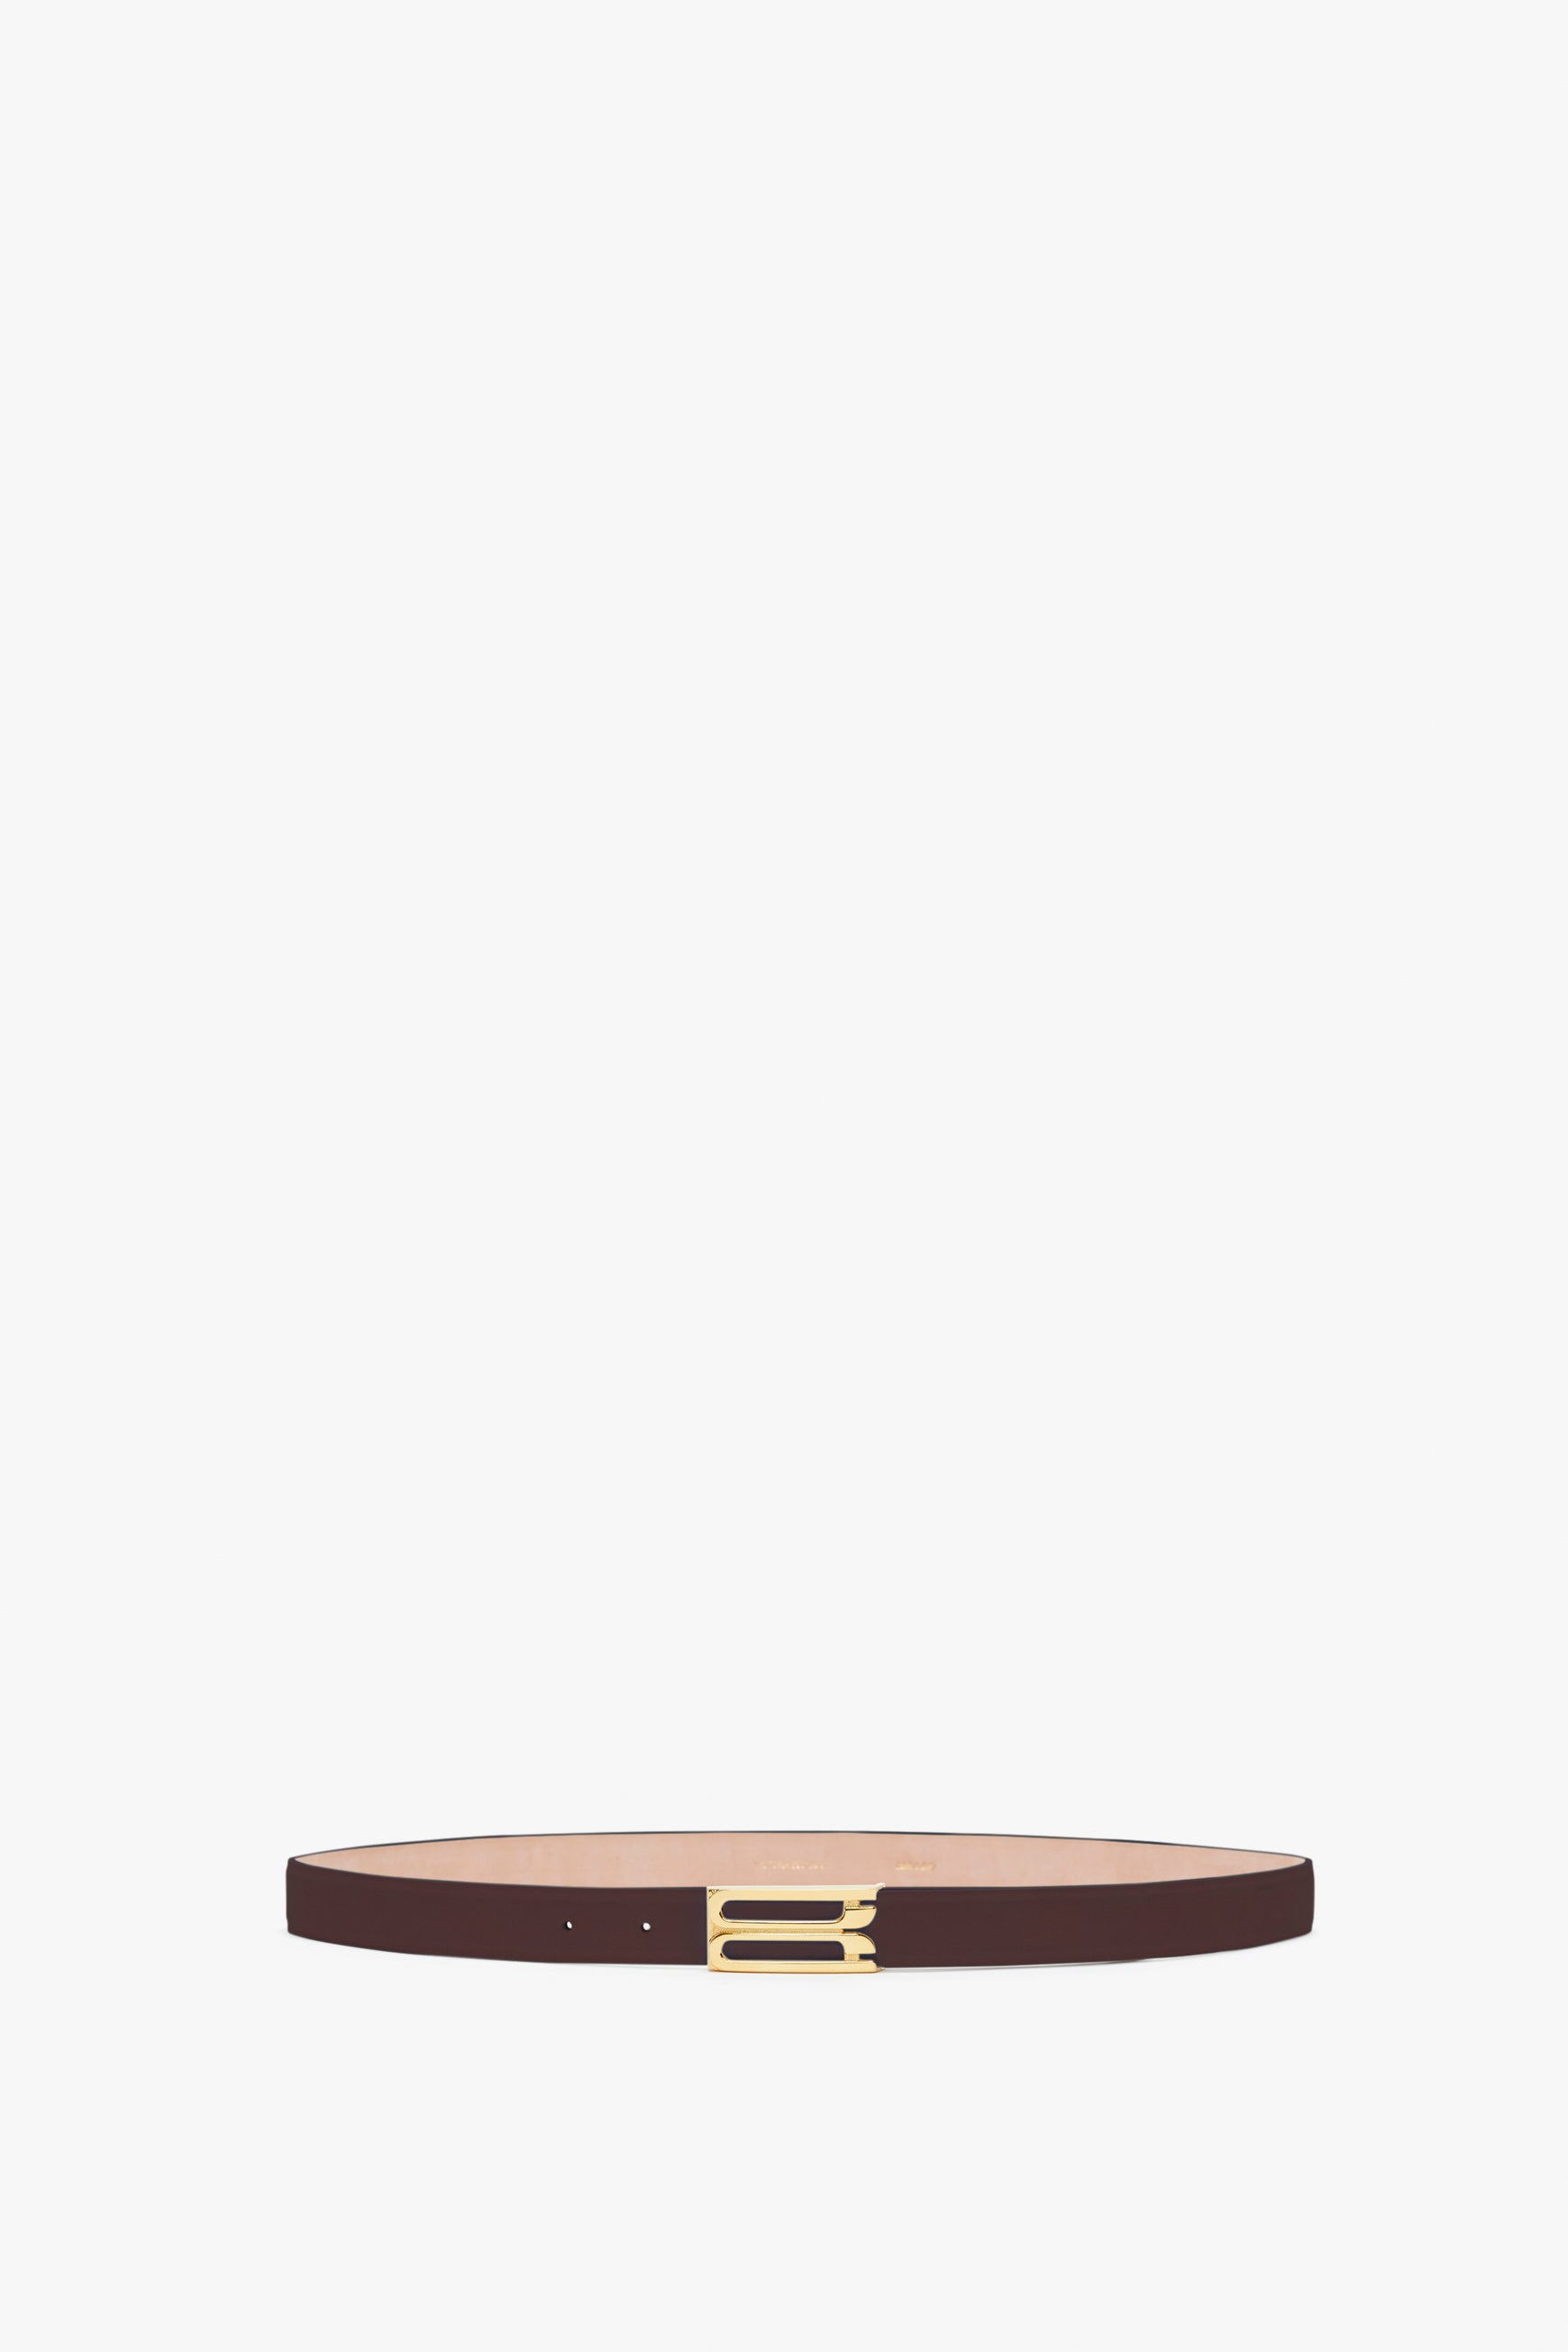 A thin Victoria Beckham Frame Belt In Burgundy Leather with gold hardware and a rectangular buckle displayed against a white background.